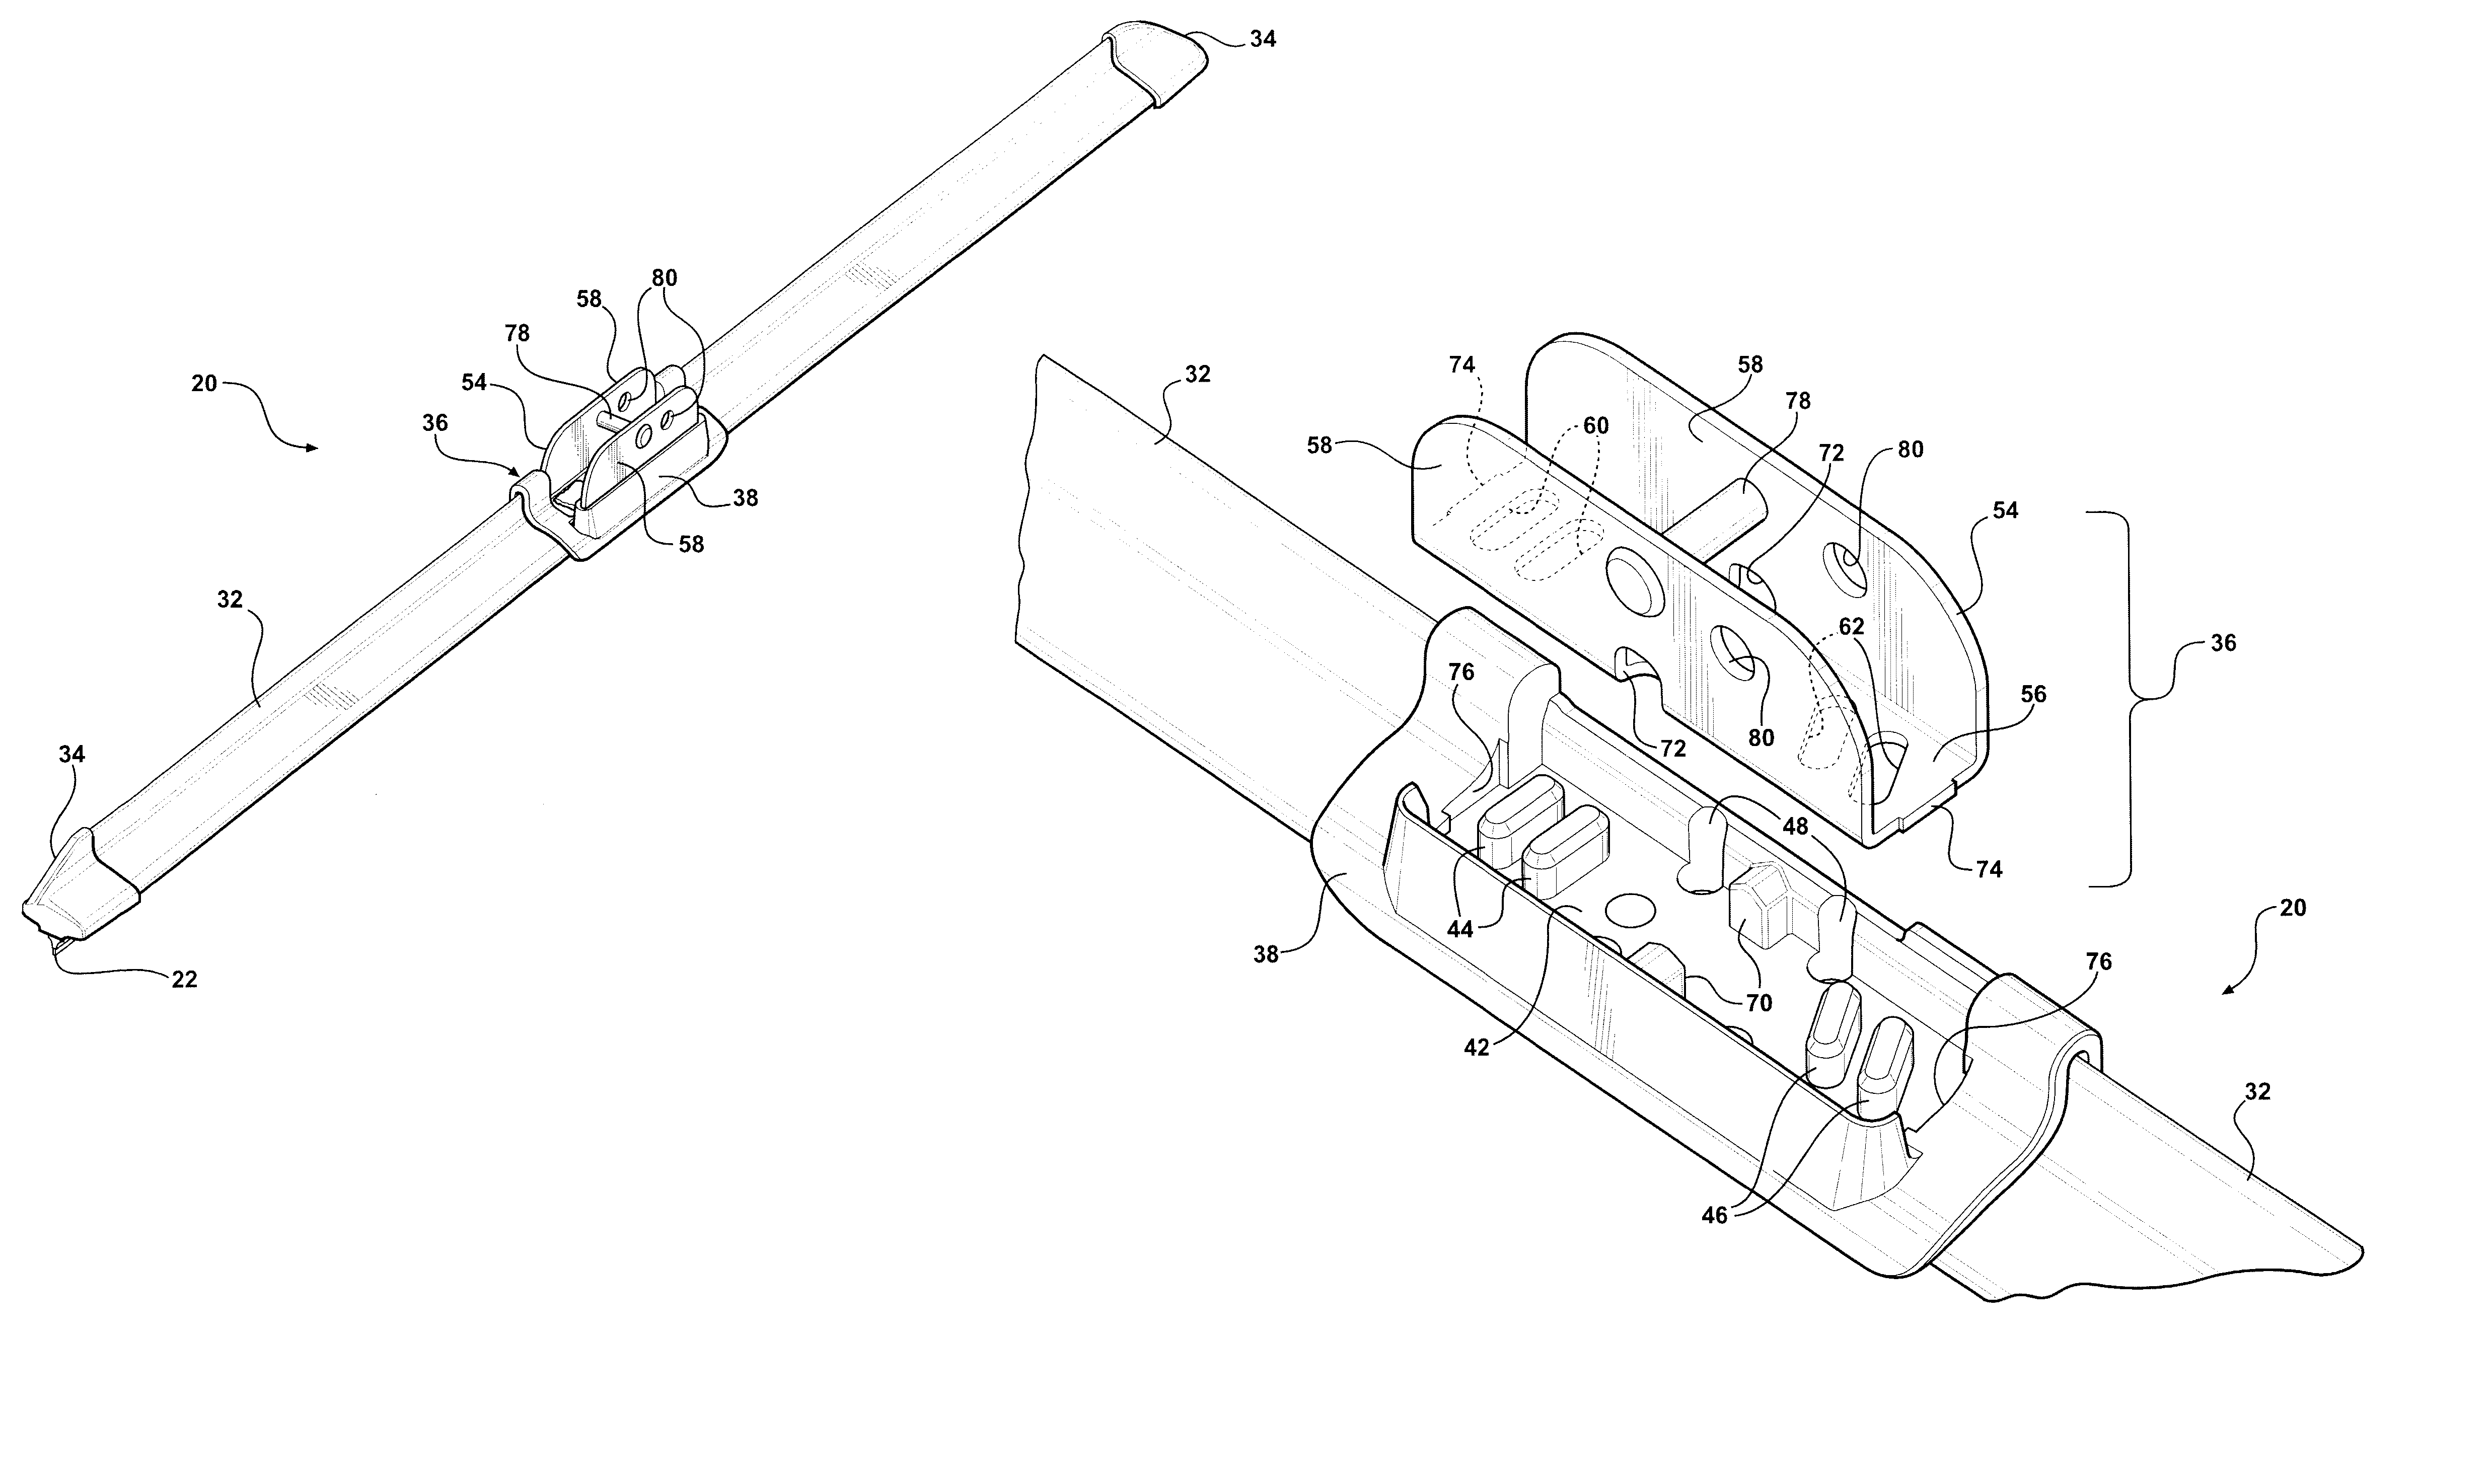 Two-piece connector for flat blade windshield wiper